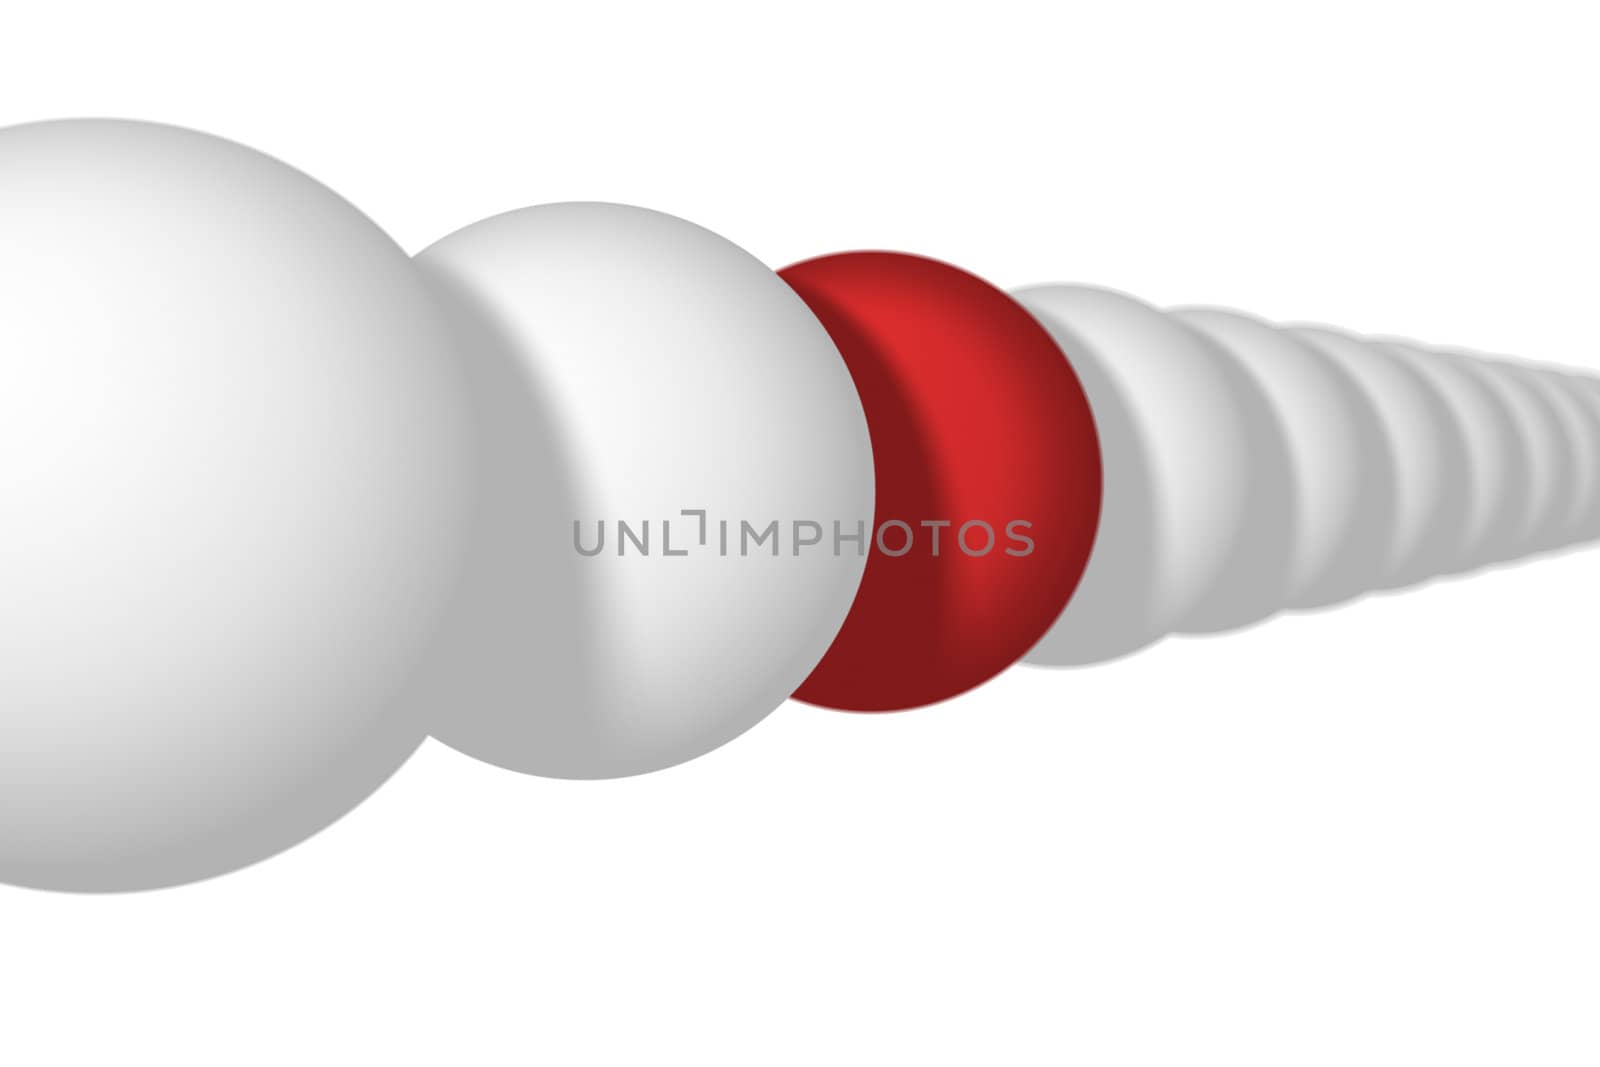 row of white balls with one red ball
